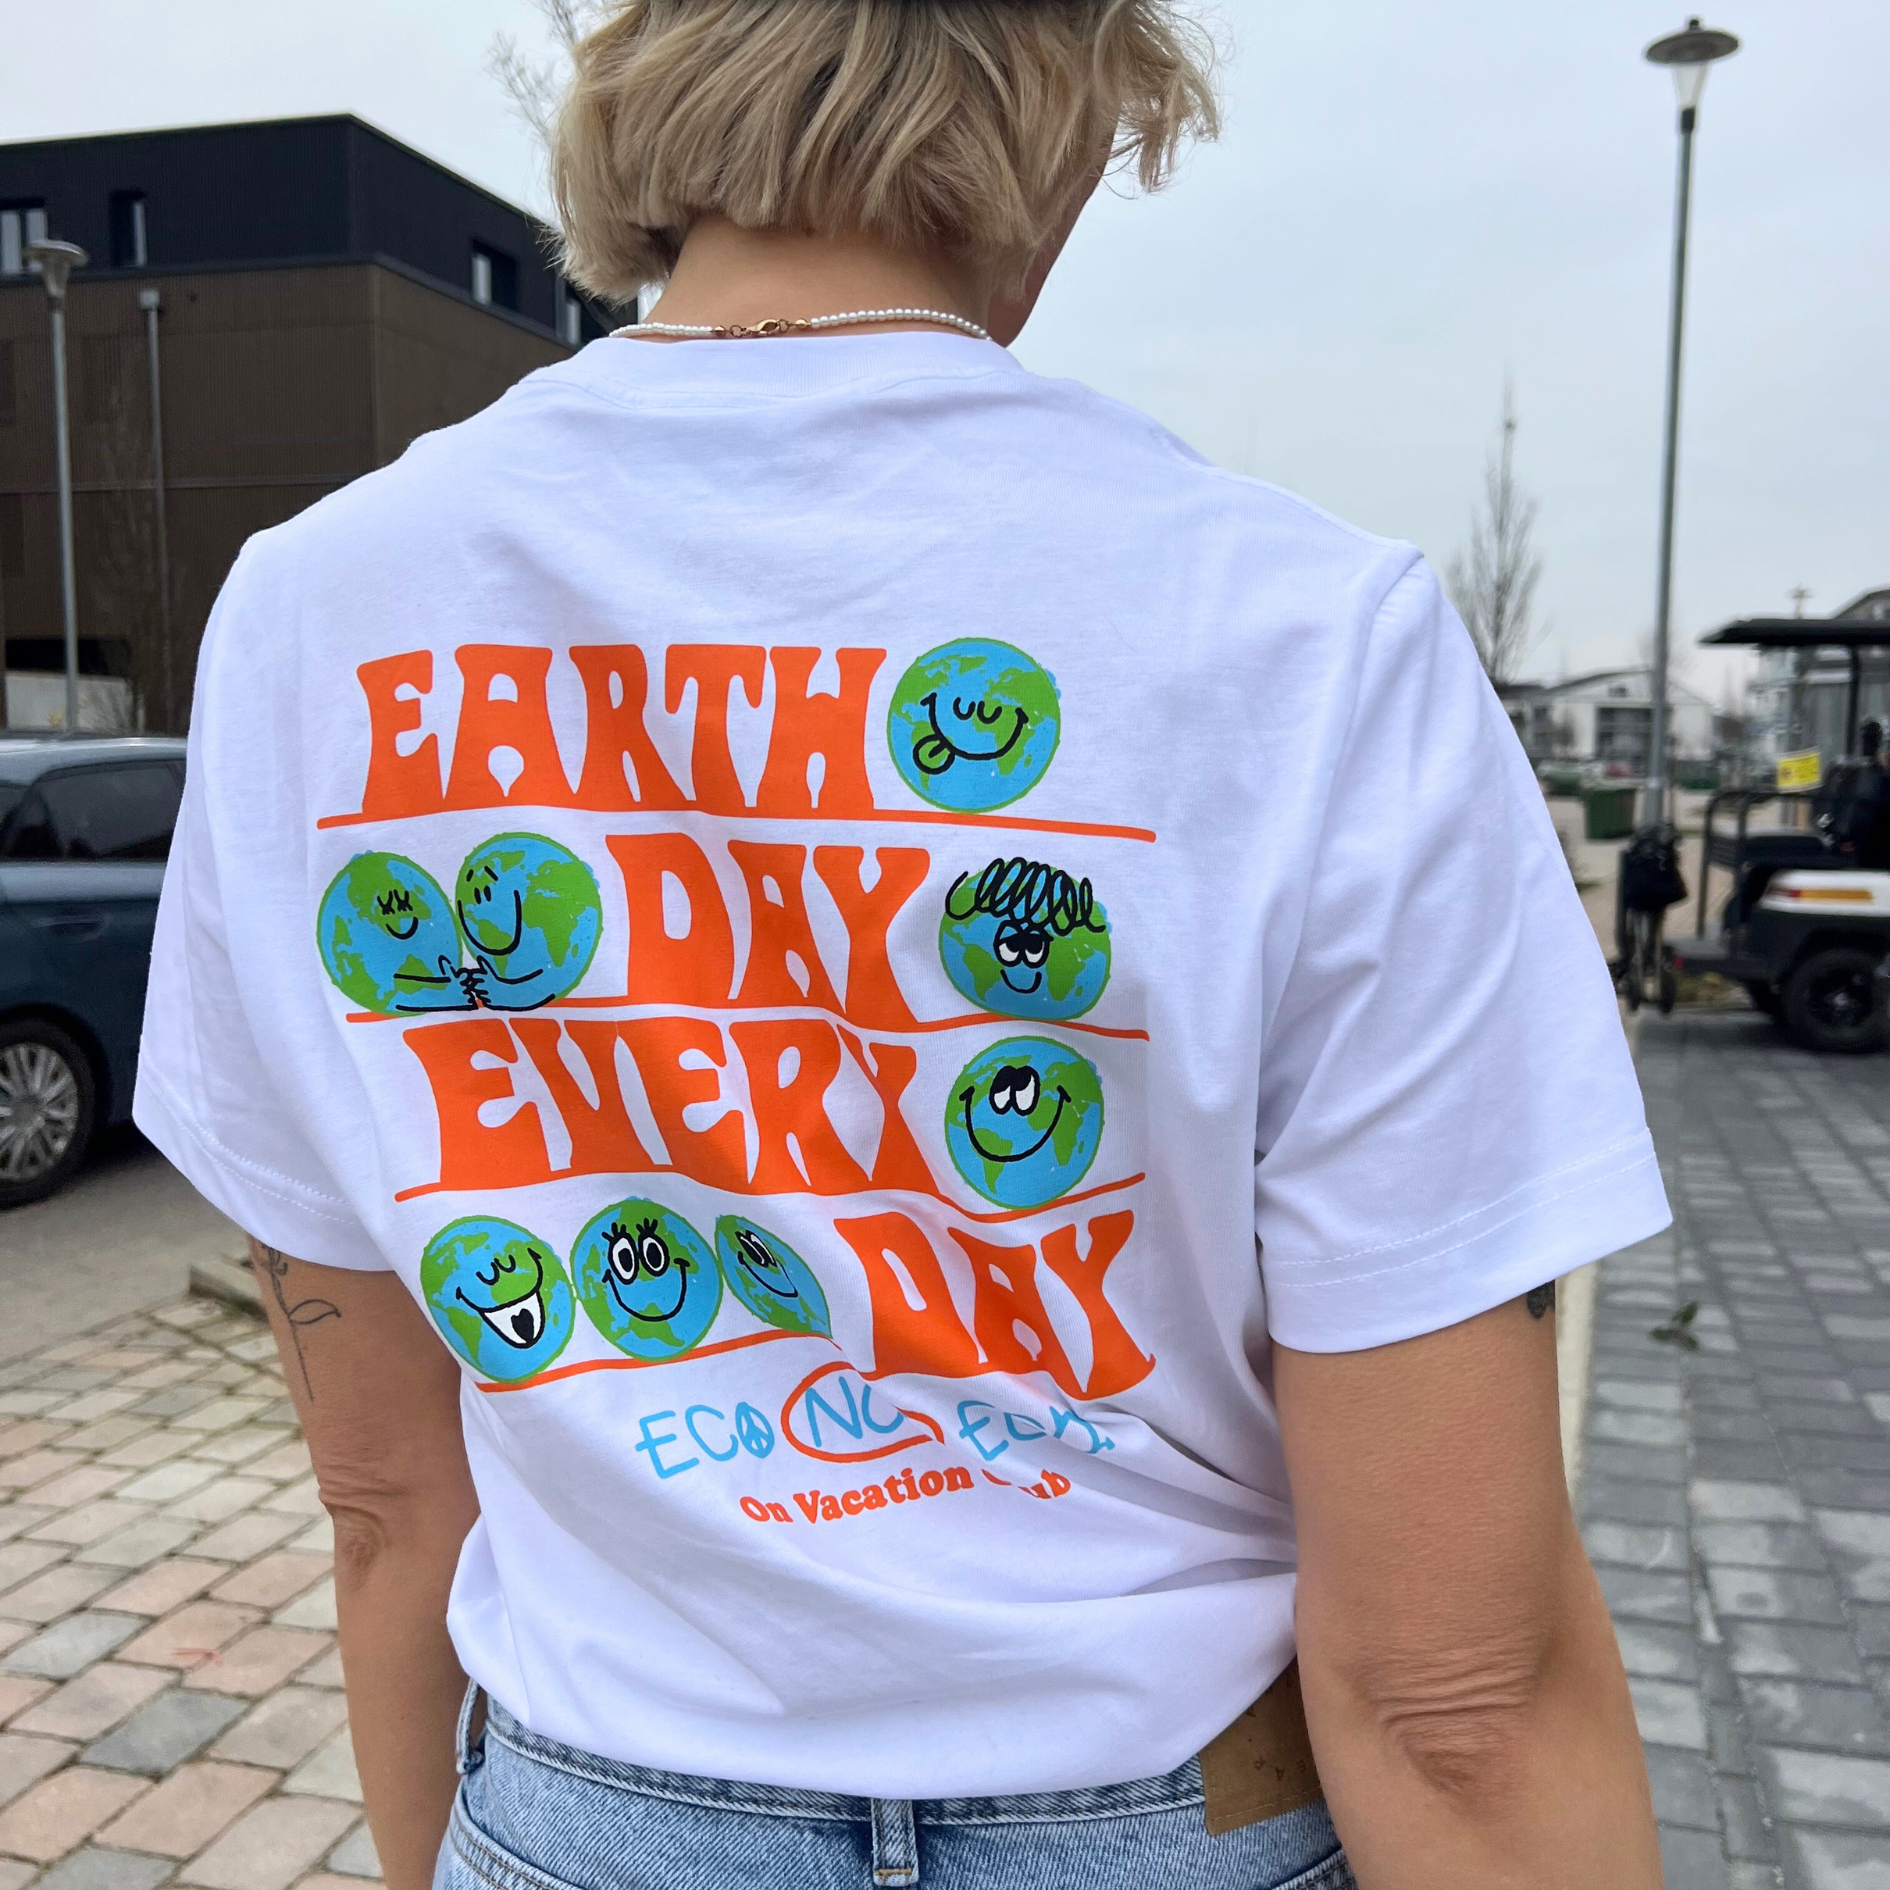 On Vacation Ladies T-Shirt "Earth Day"